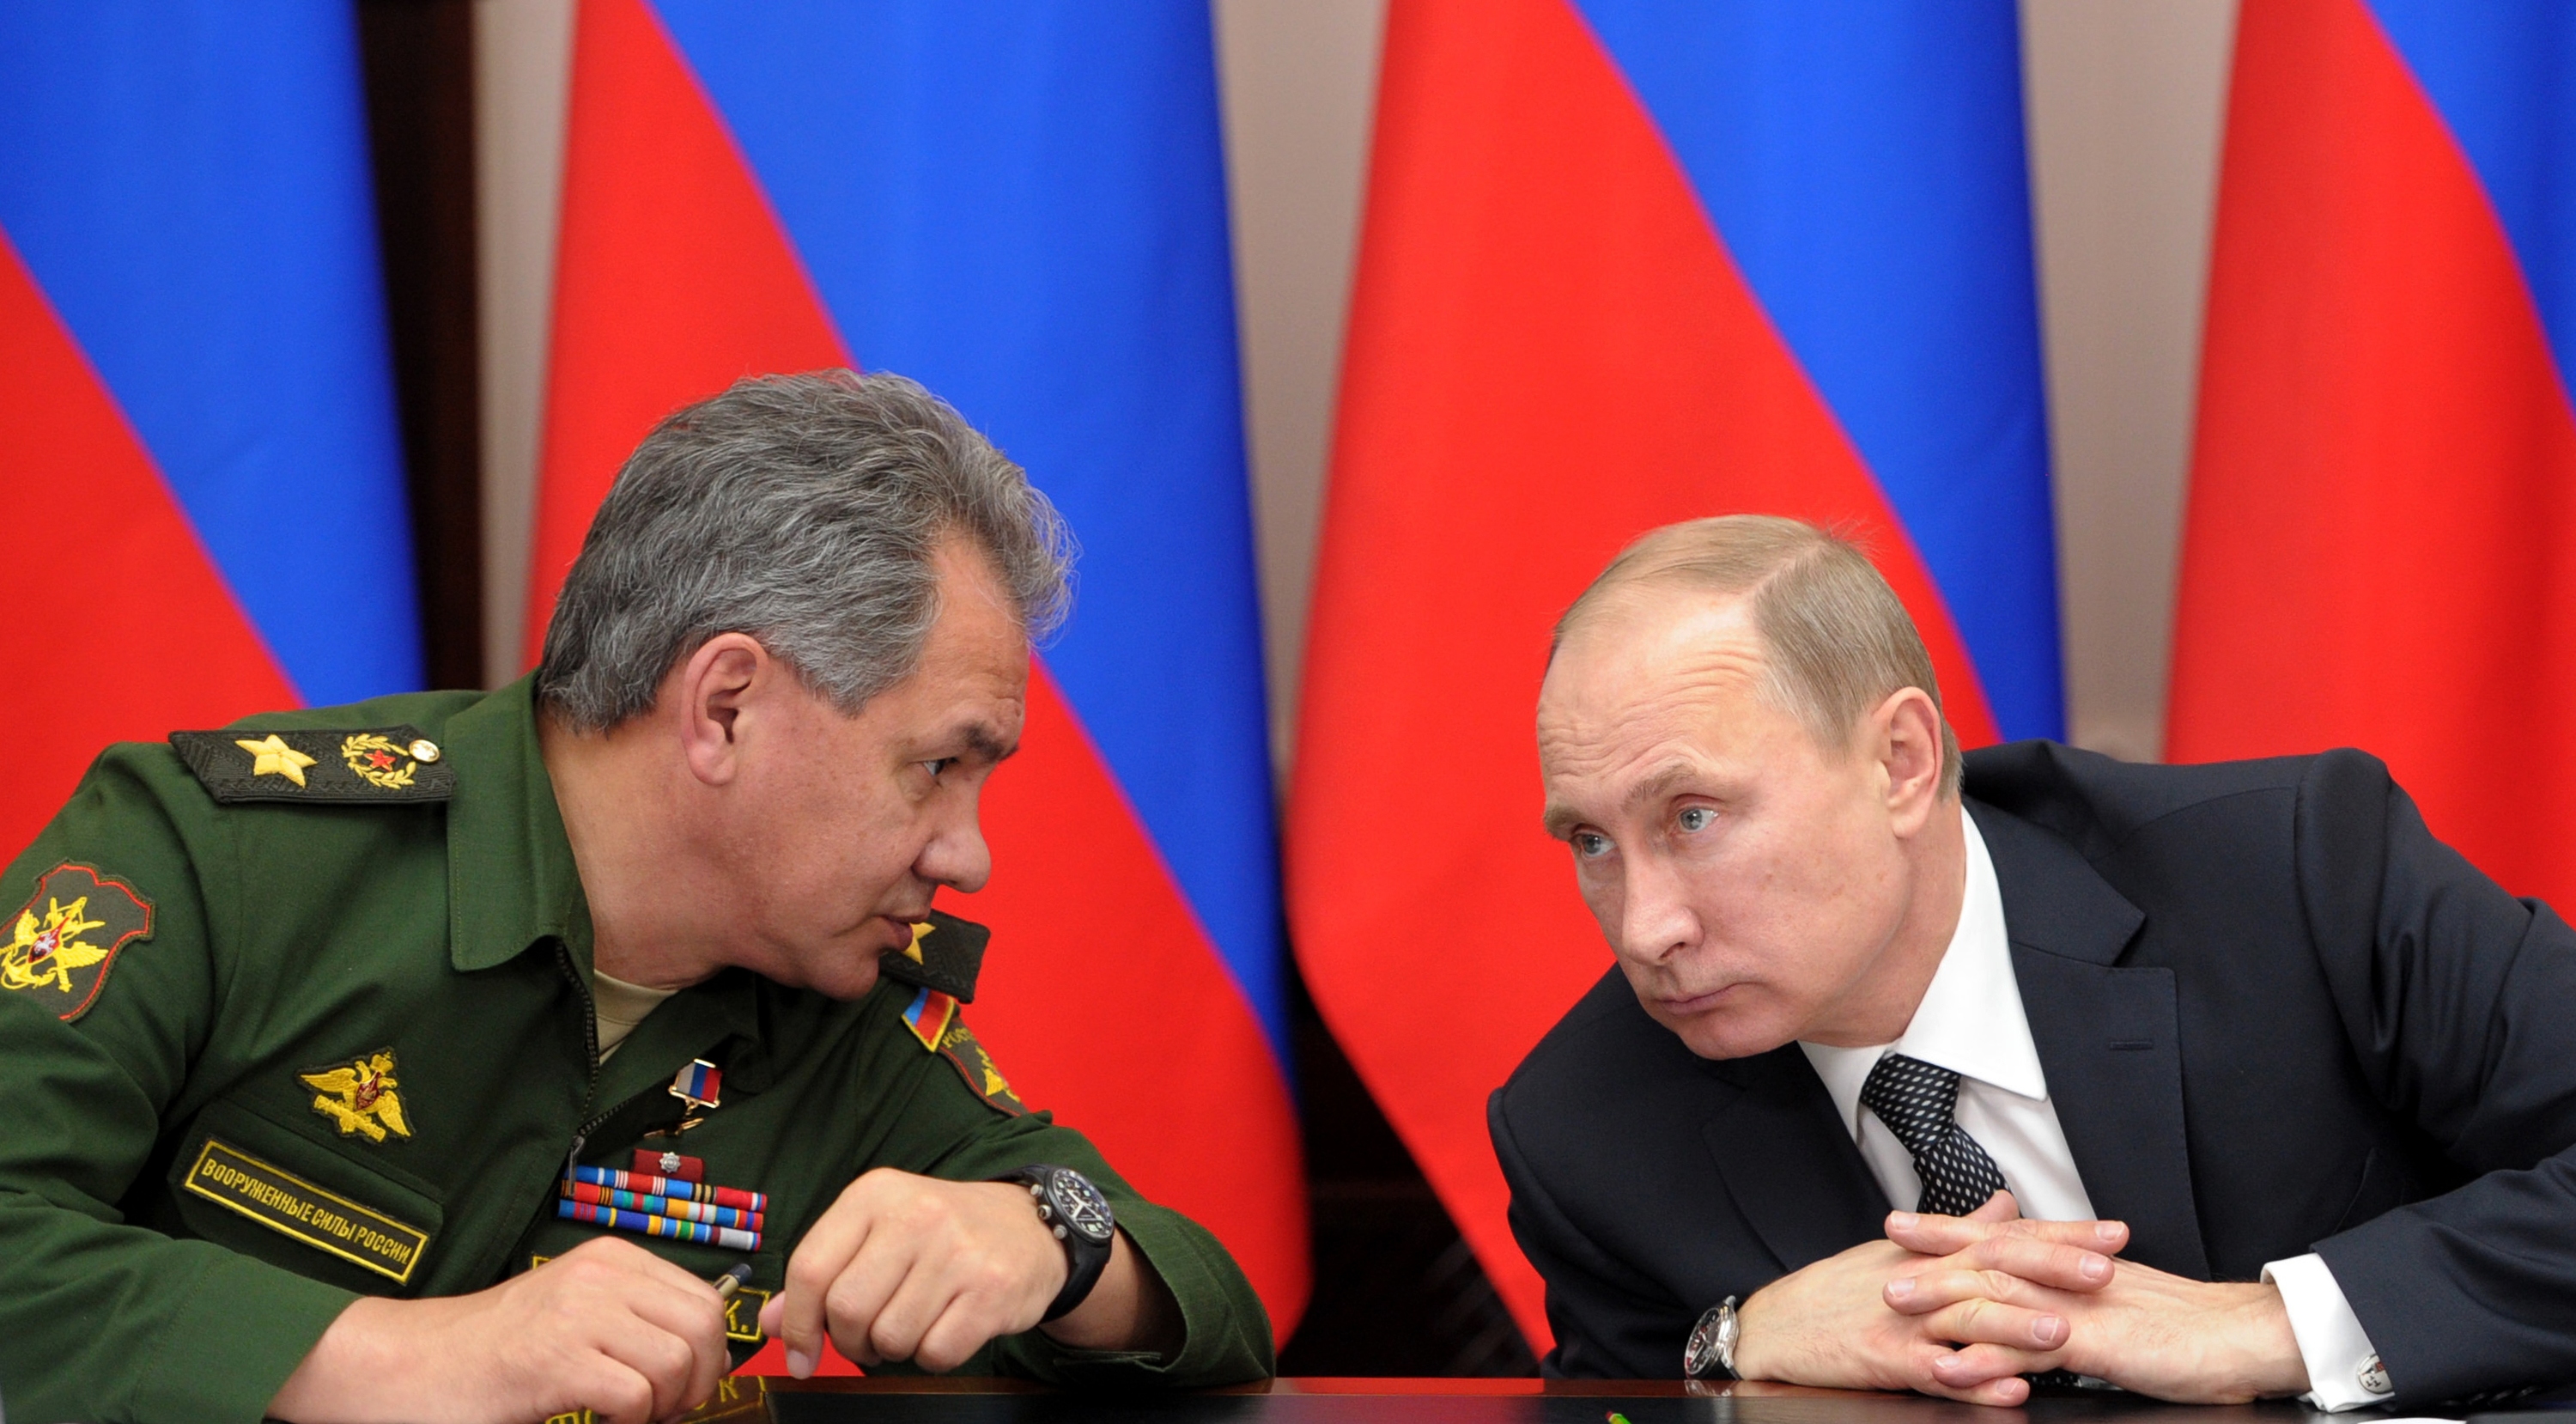 FILE - In this Friday, Nov. 15, 2013 file photo Russian President Vladimir Putin, right, and Defense Minister Sergei Shoigu attend a meeting while visiting the airborne troops school in the city of Ryazan, some 100 km (62.5 miles) southeast of Moscow, Russia. President Vladimir Putin on Wednesday, Feb. 26, 2014, ordered massive exercises involving most of its military units in western Russia amid tensions in Ukraine. (AP Photo/RIA-Novosti, Alexei Nikolsky, Presidential Press Service, File)